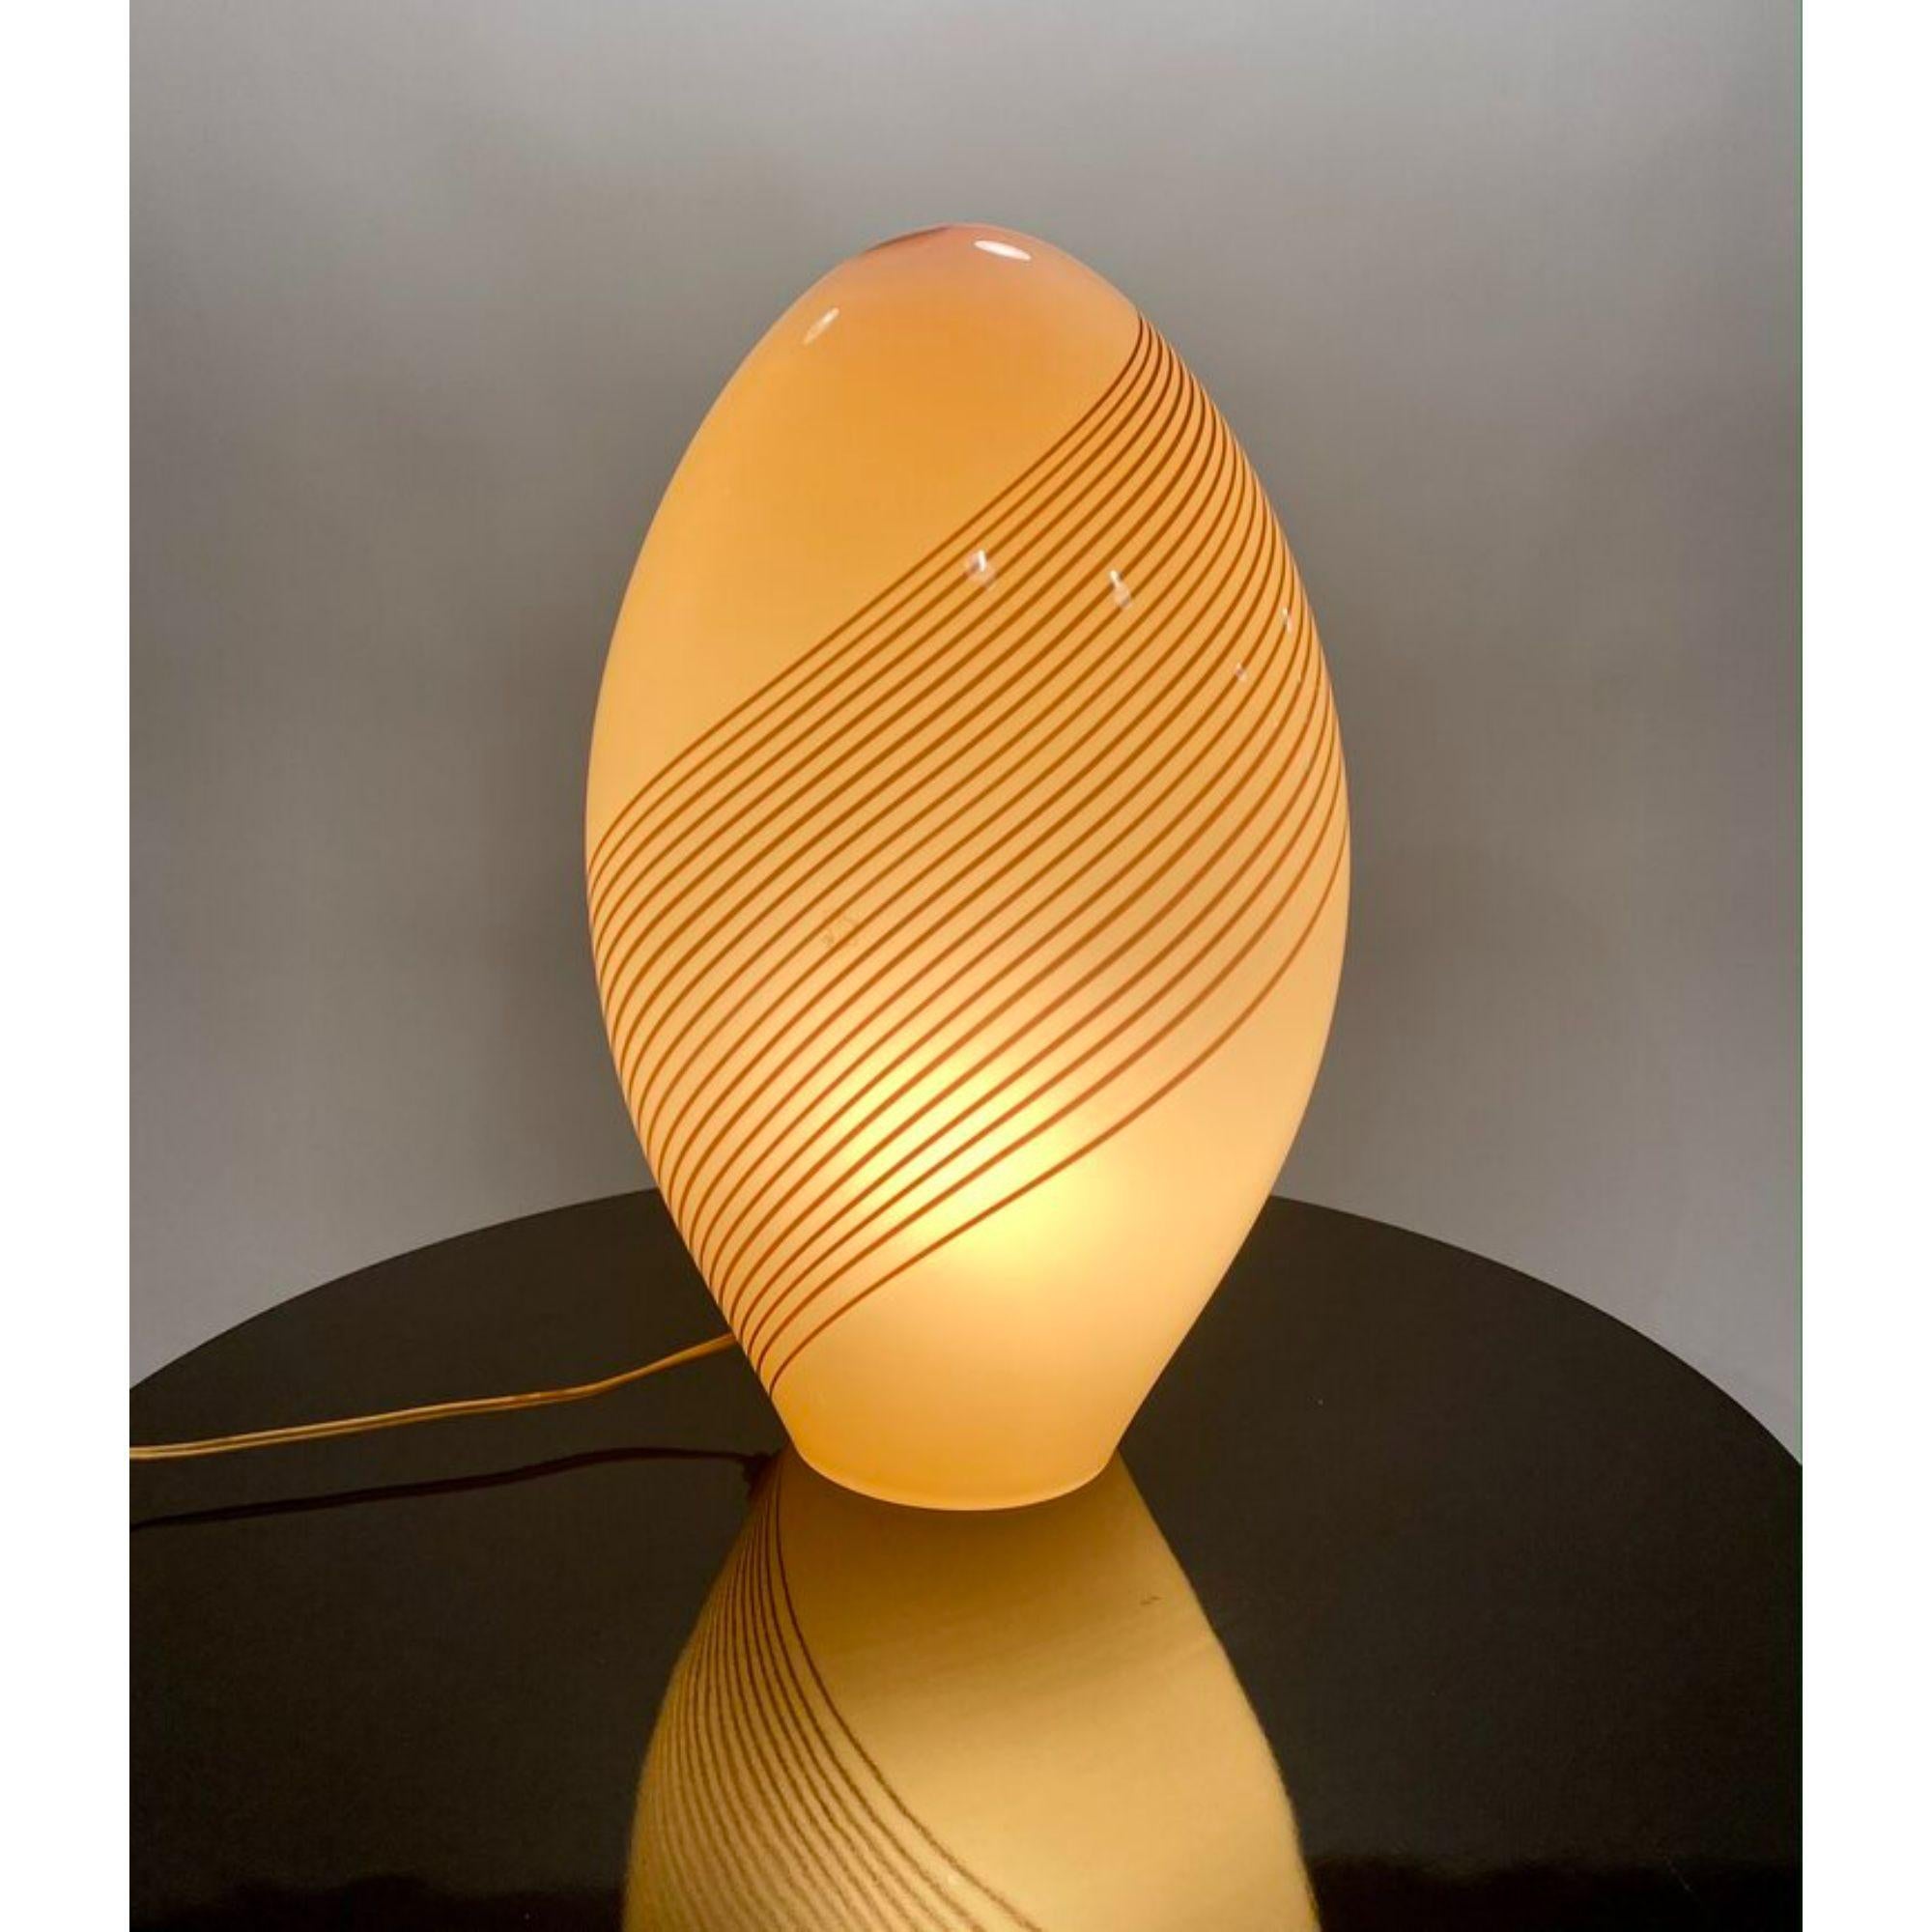 Mid-Century Modern Murano glass table lamp. Designed by Lino Tagliapietra for Effetre International Company, Italy.

Additional Information:
Materials: Murano Glass
Style: Mid-Century Modern Postmodern
Designer: Lino Tagliapietra
Brand: